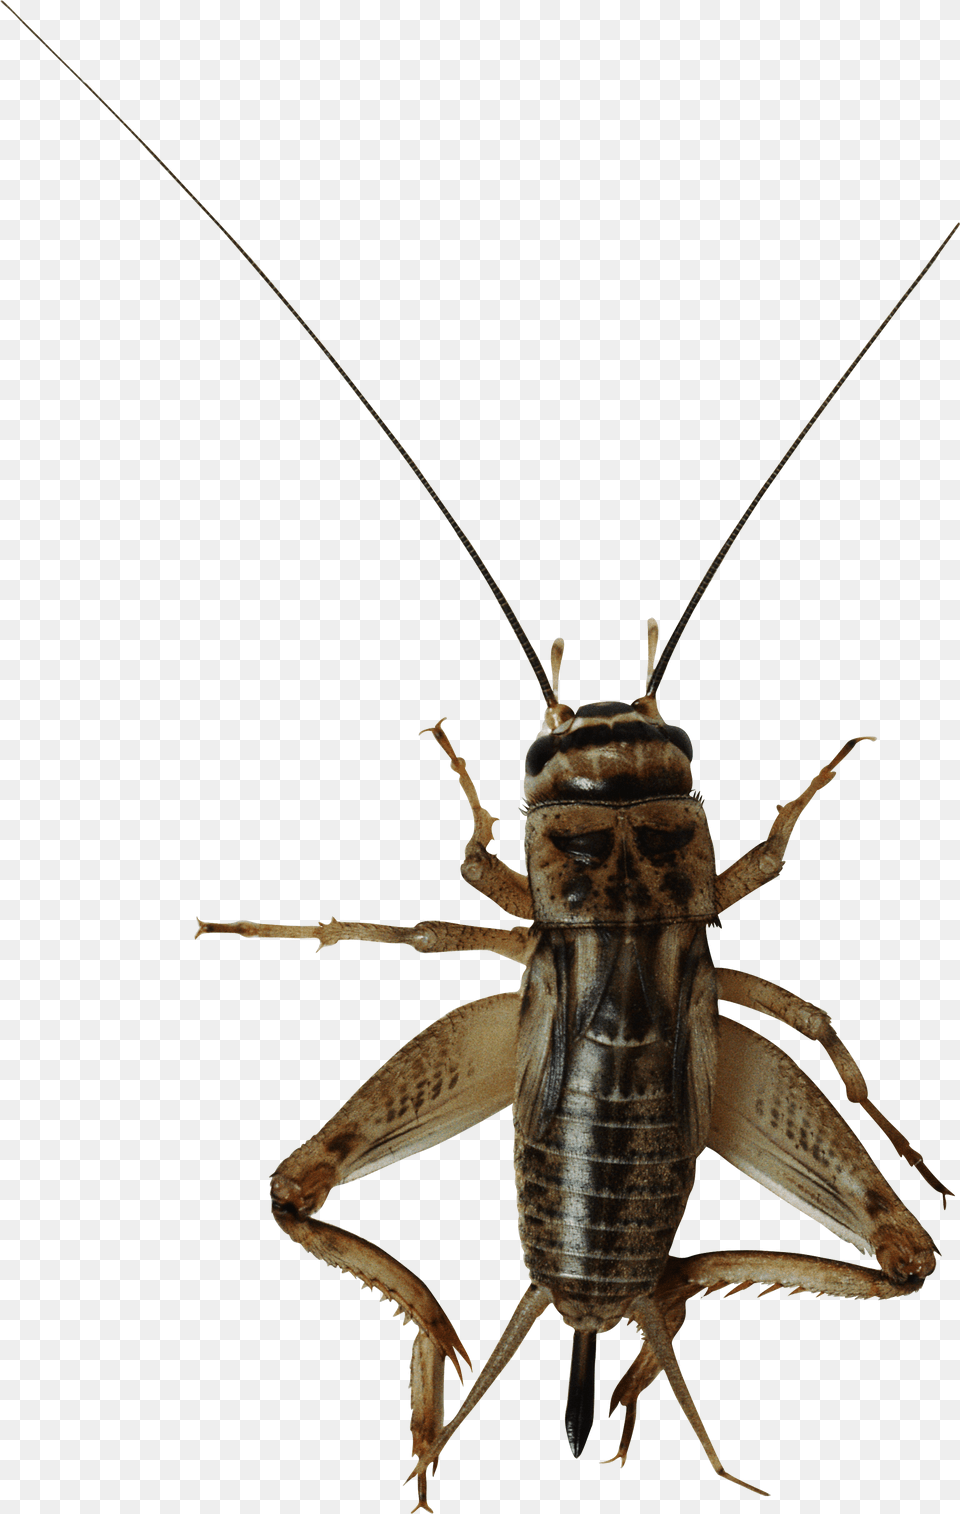 Bug, Animal, Cricket Insect, Insect, Invertebrate Png